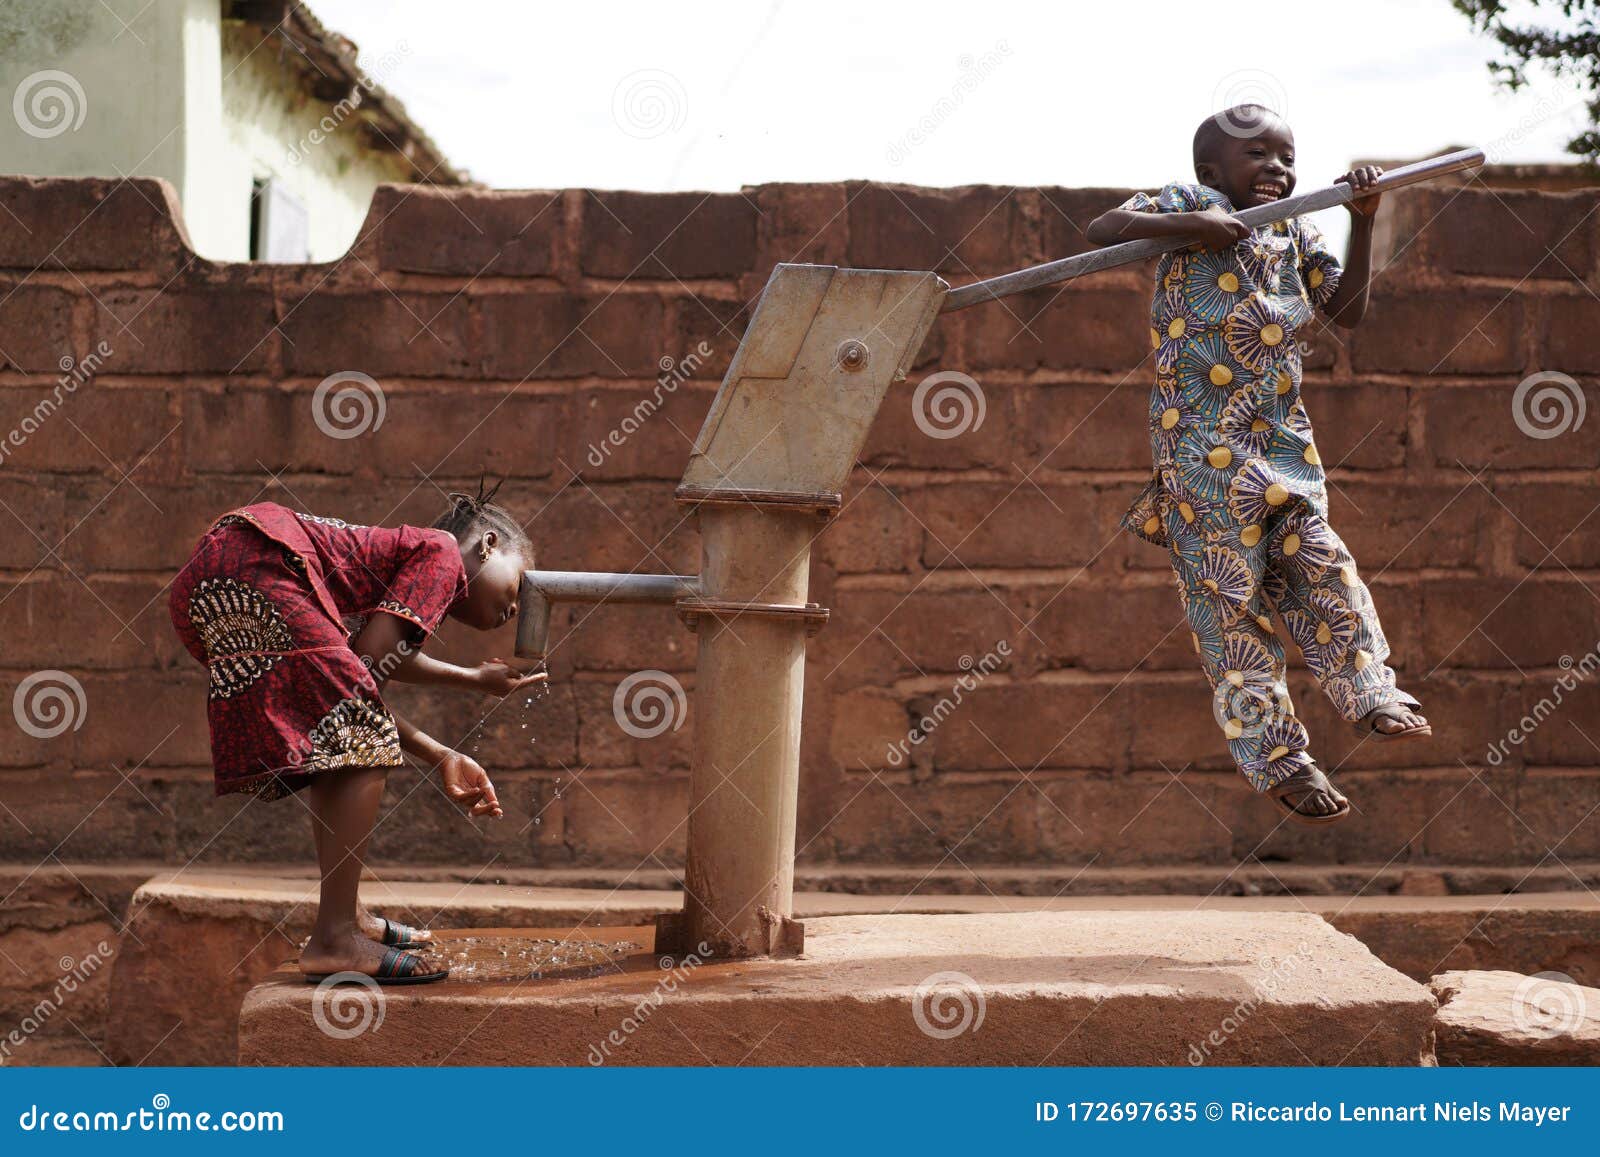 Children Laughing Water Africa Photos - Free & Royalty-Free Stock from Dreamstime